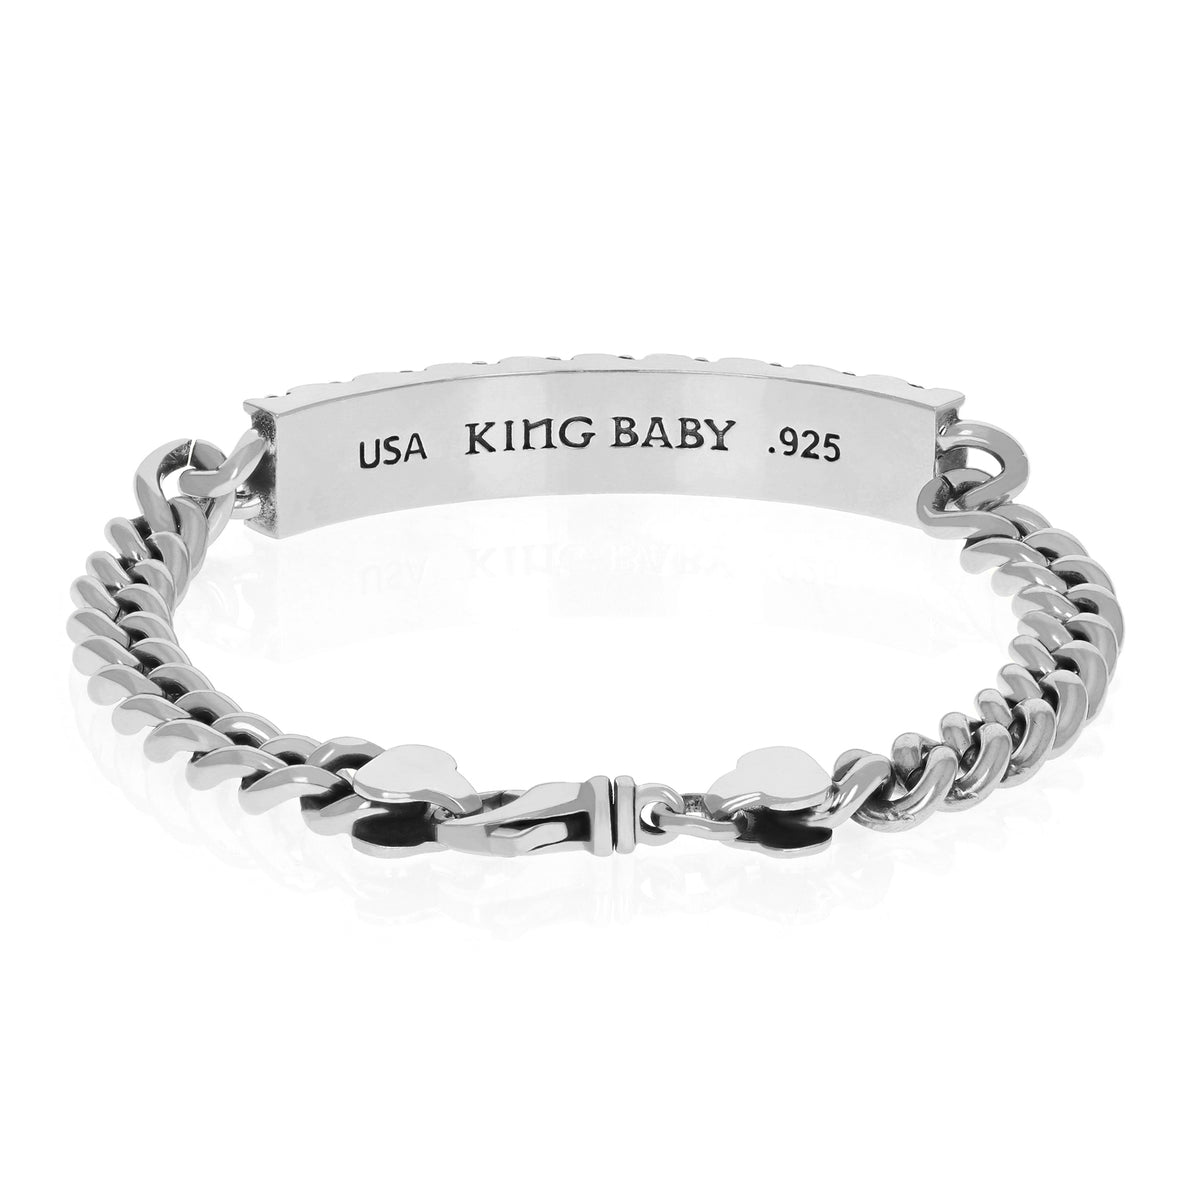 King Baby Large Handcuff Clasp Silver Bracelet